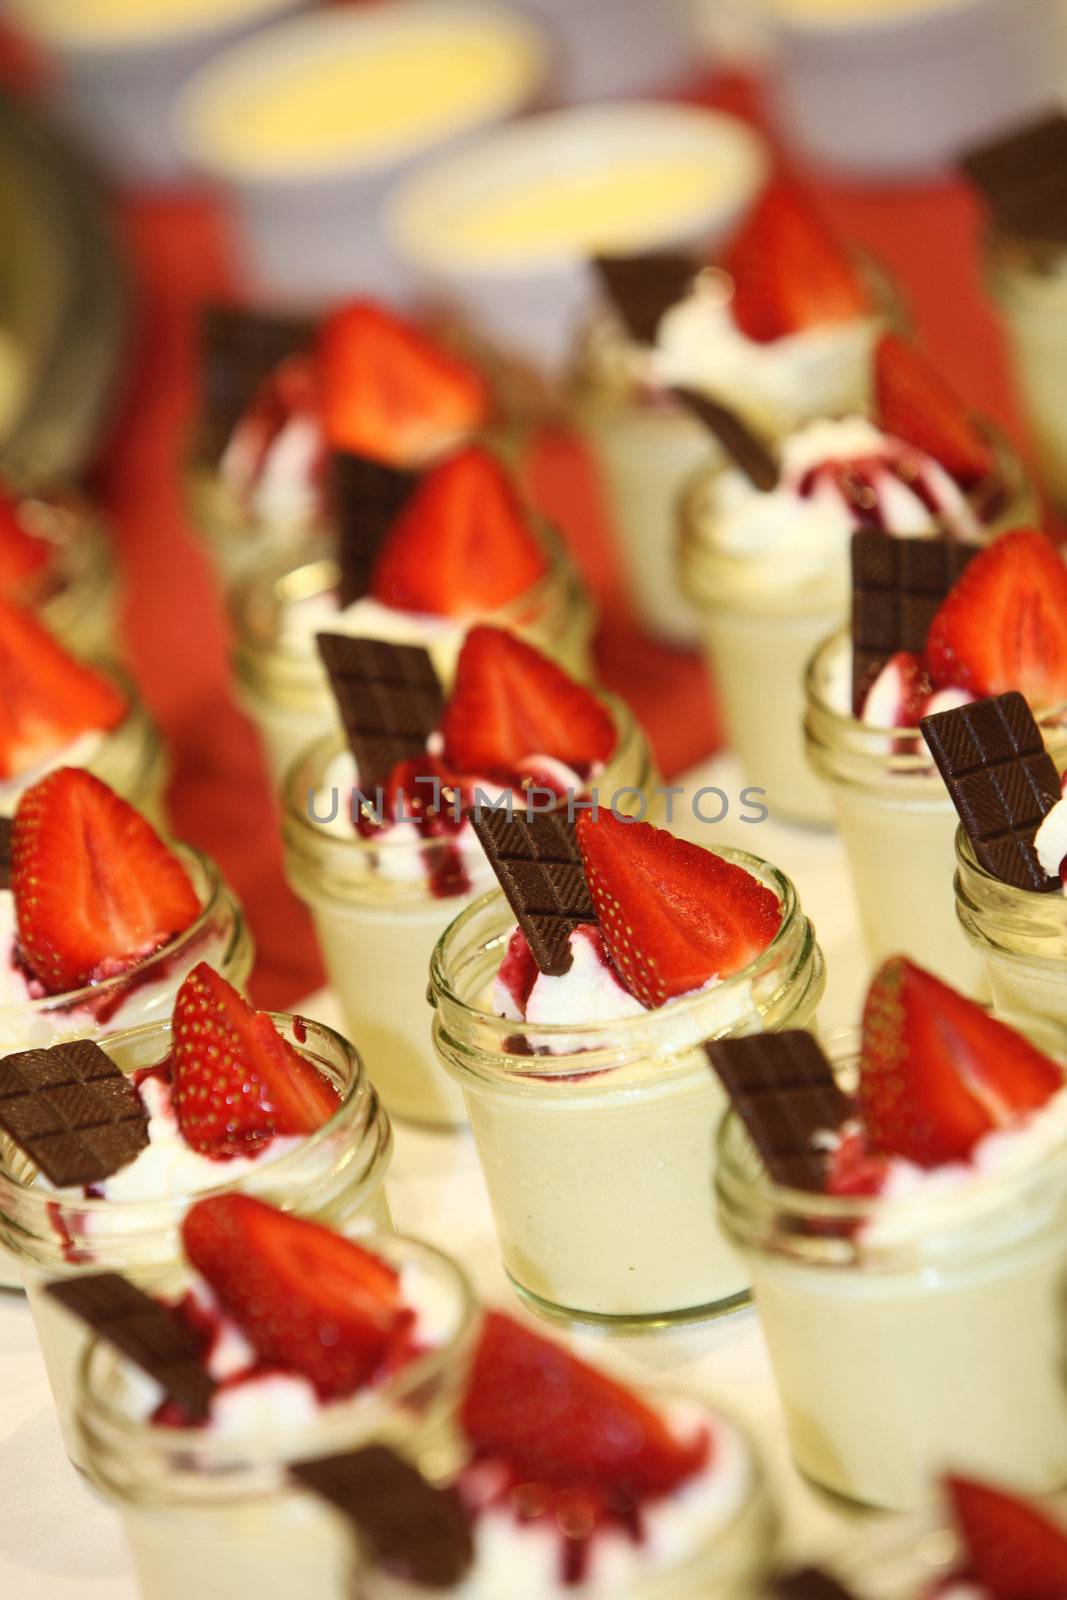 Sweet dessert with strawberries and chocolate - Many small bowl, close up